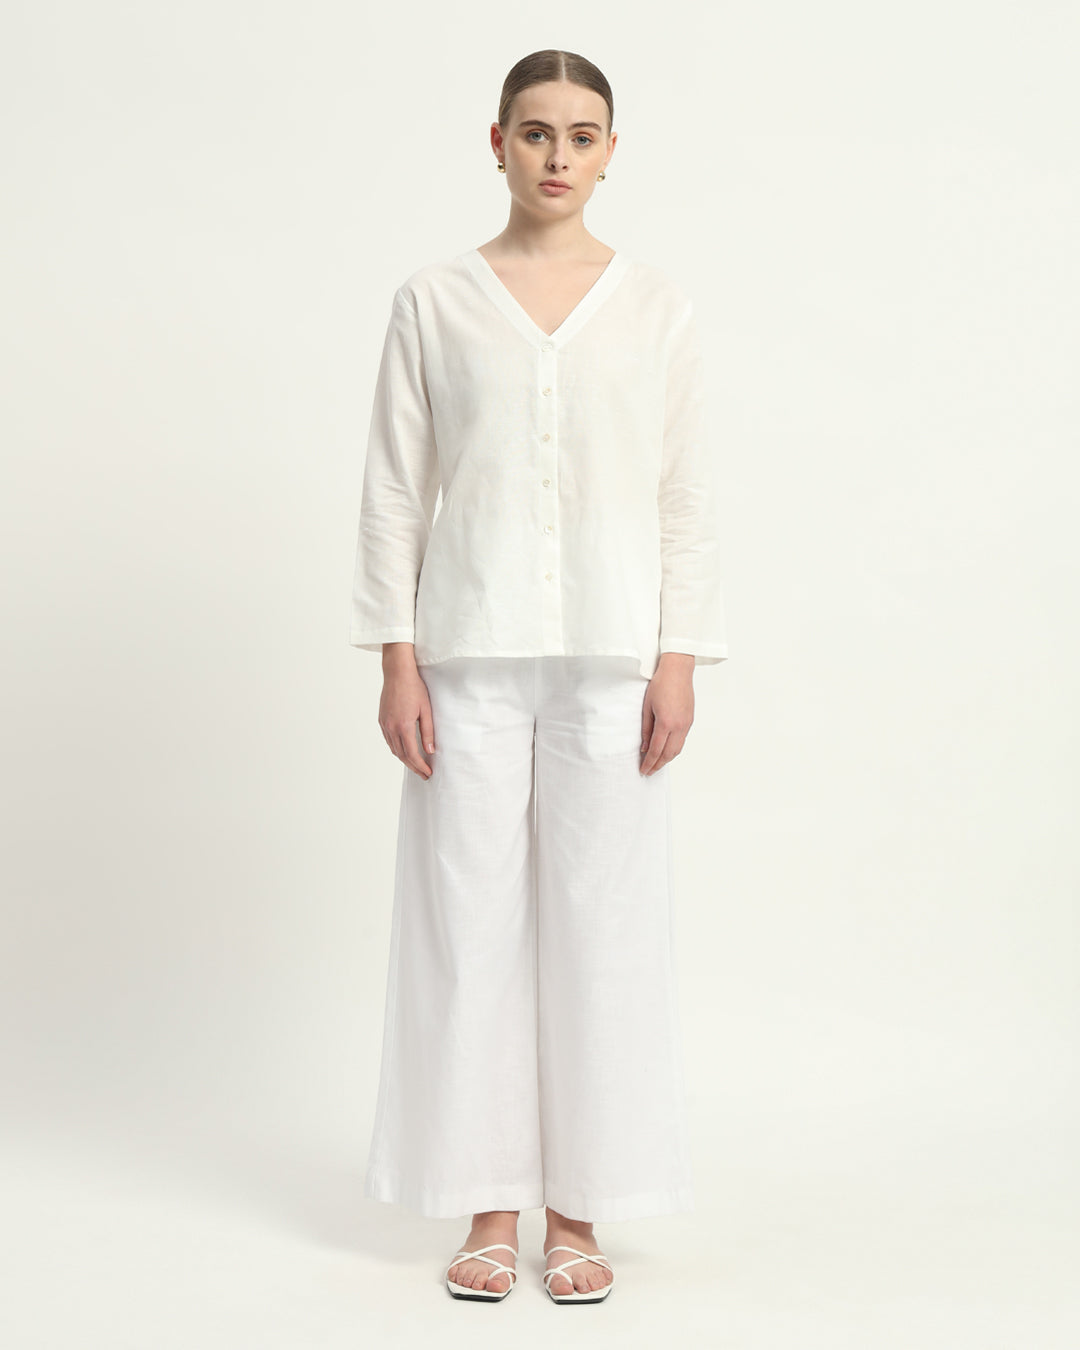 Classic Grace White Linen Top (Without Bottoms)